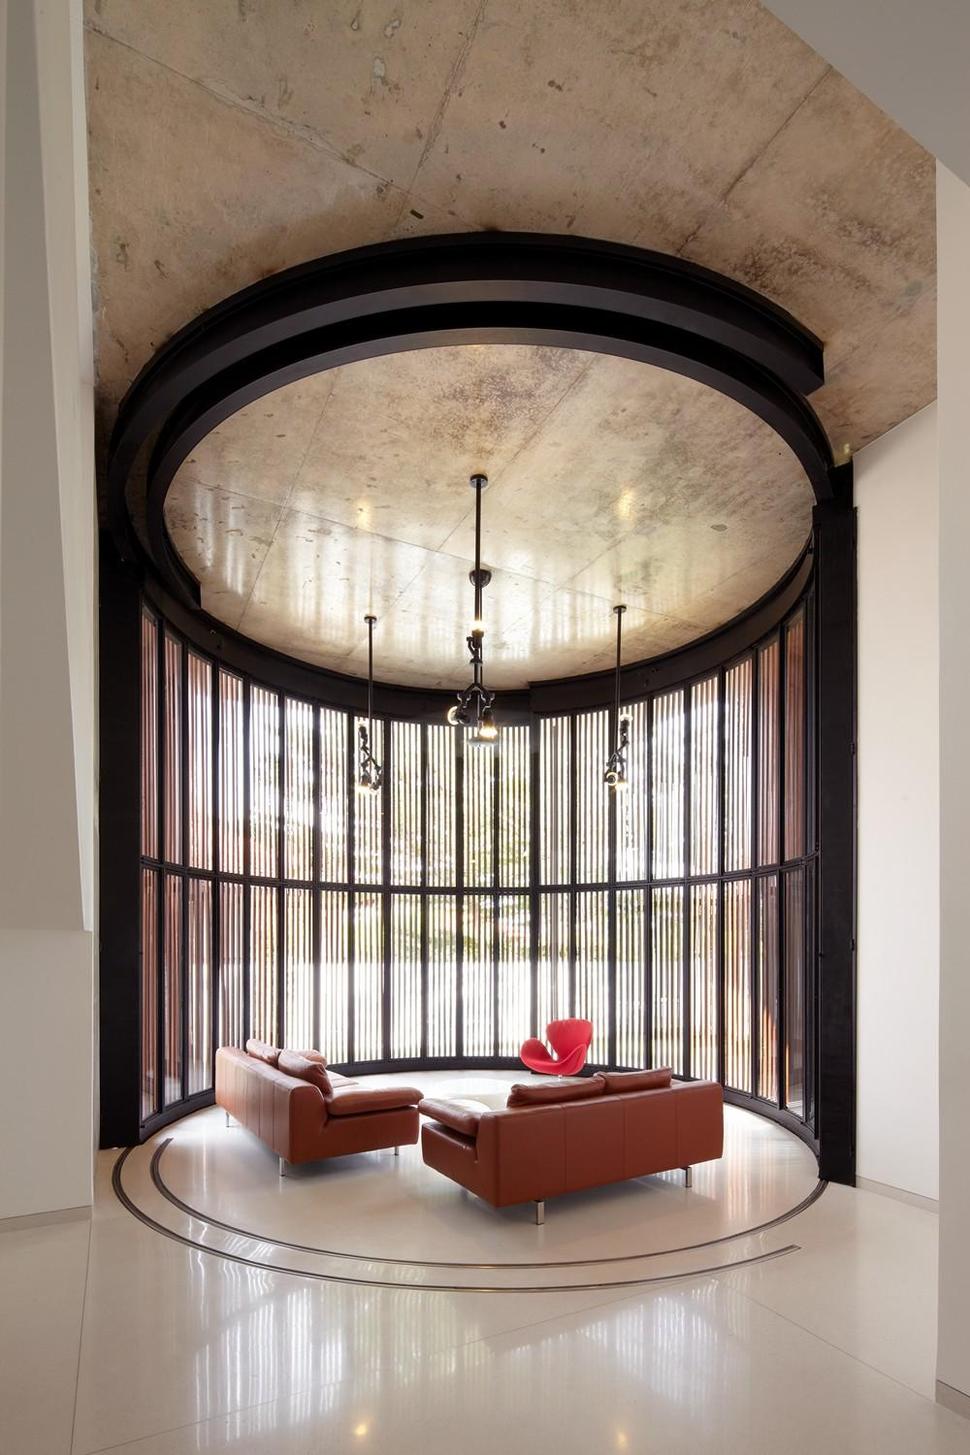 curved-stacking-glass-doors-surround-drum-shaped-room-voila-house-23-drum-closed.jpg